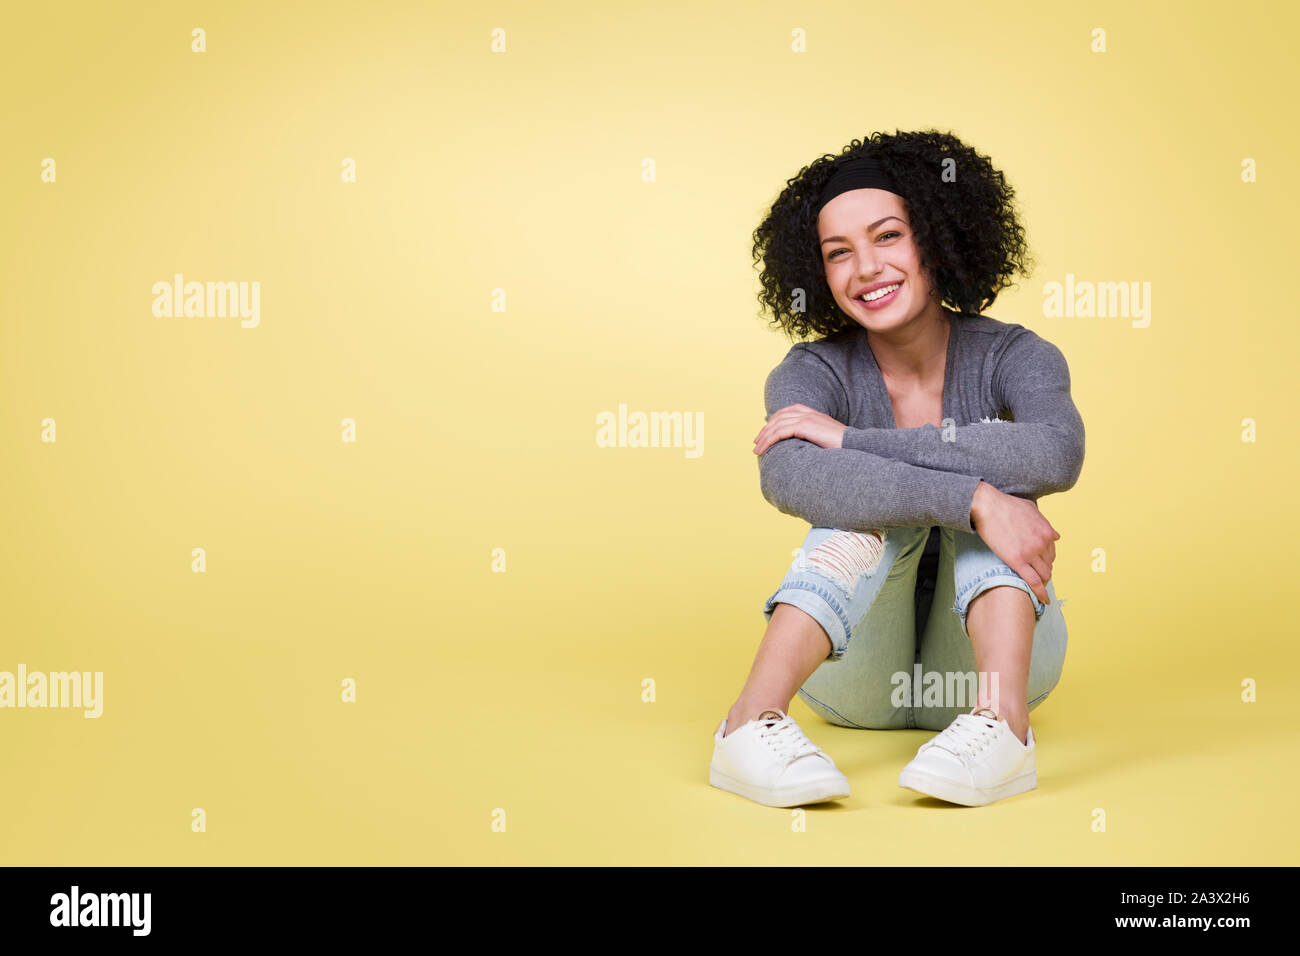 Happy girl sitting smiling on yellow background with copy space. Stock Photo